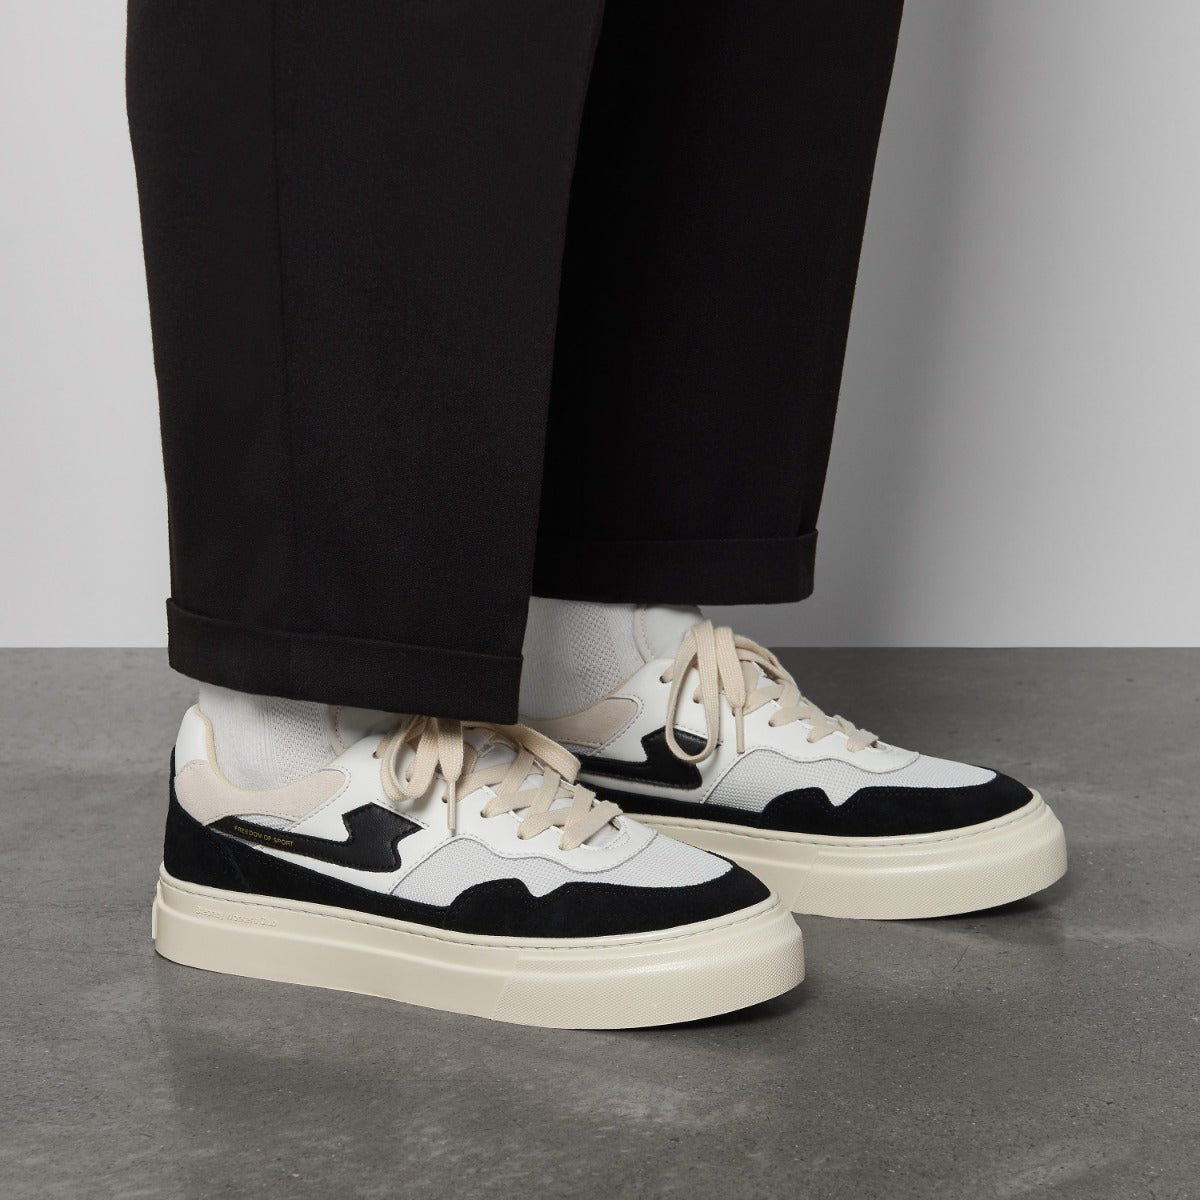 Pearl S-Strike Suede Mix White Black on foot